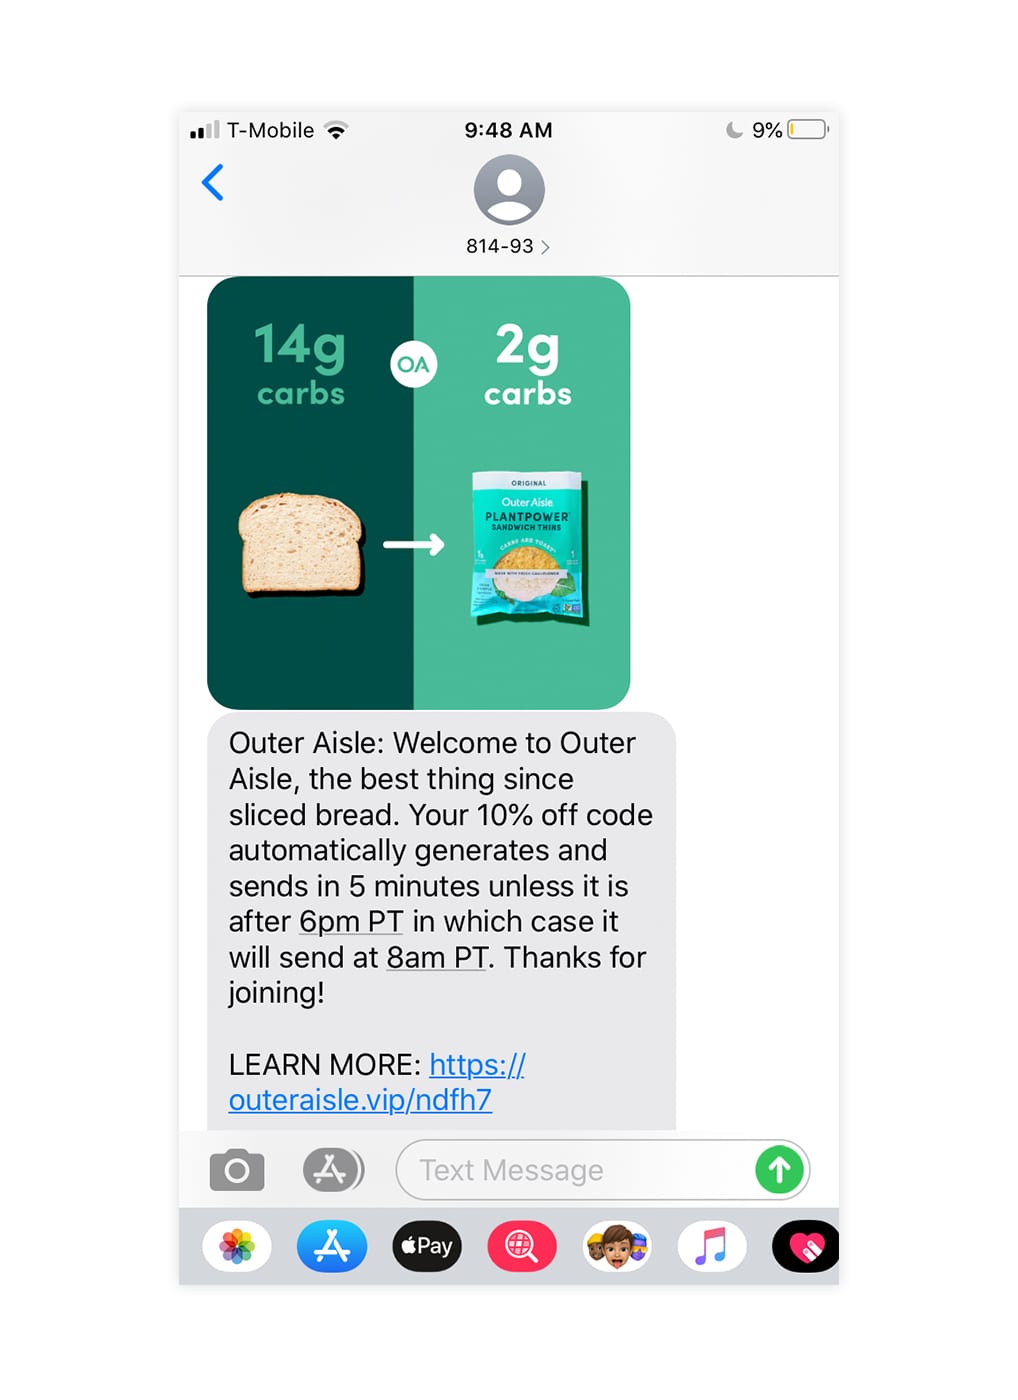 Example of offering discounts for SMS marketing